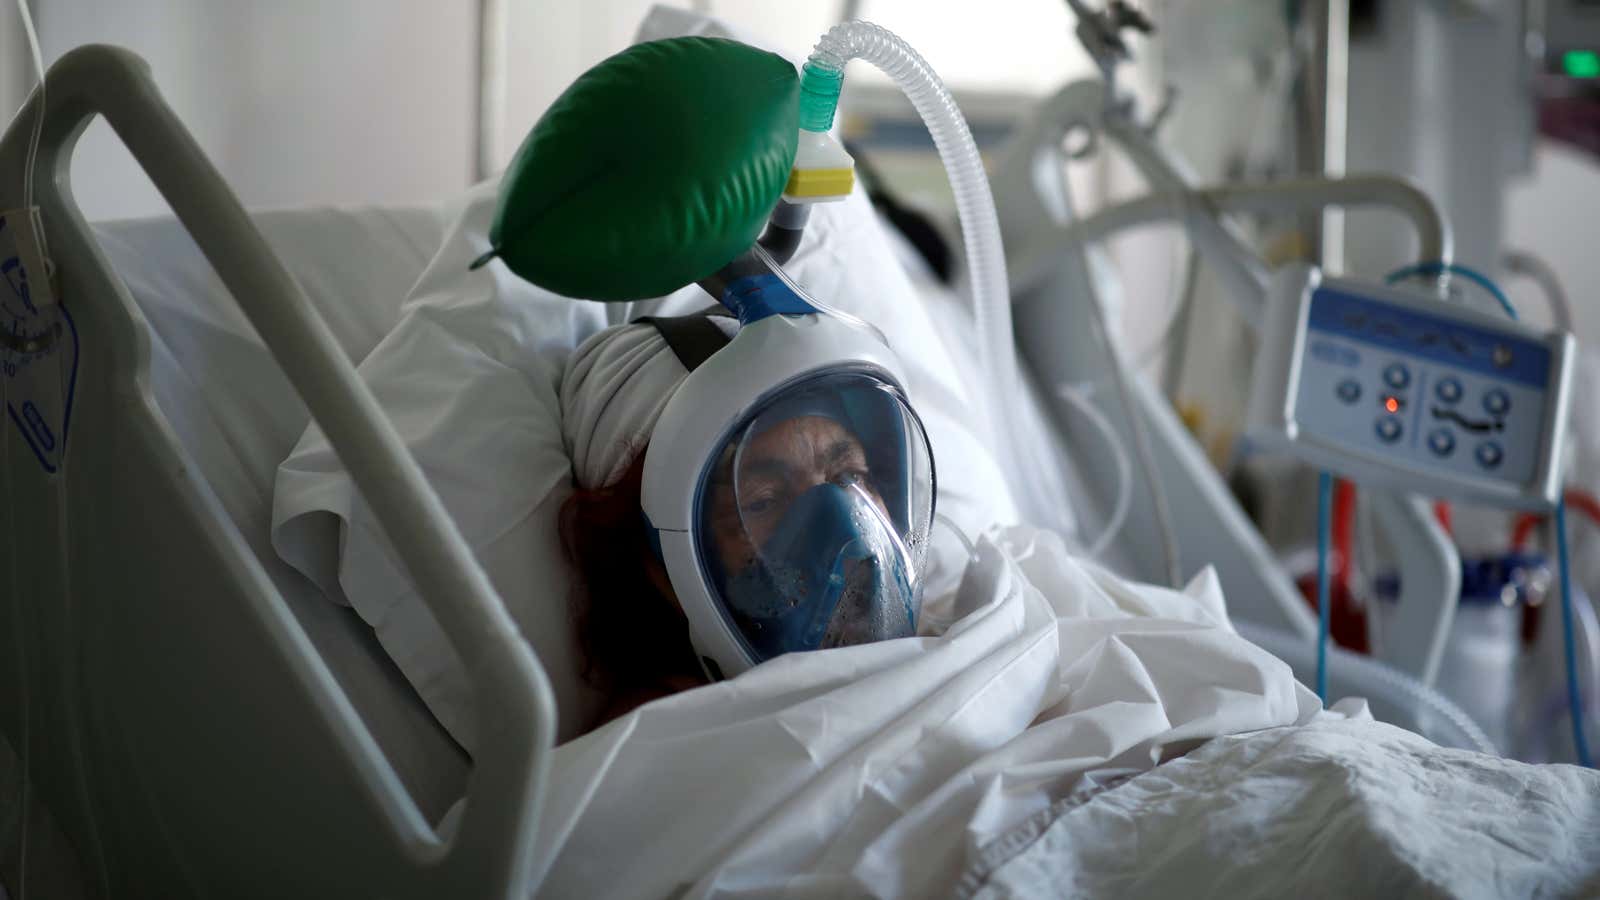 A Covid-19 patient in France wears a non-invasive ventilator made from a scuba mask.